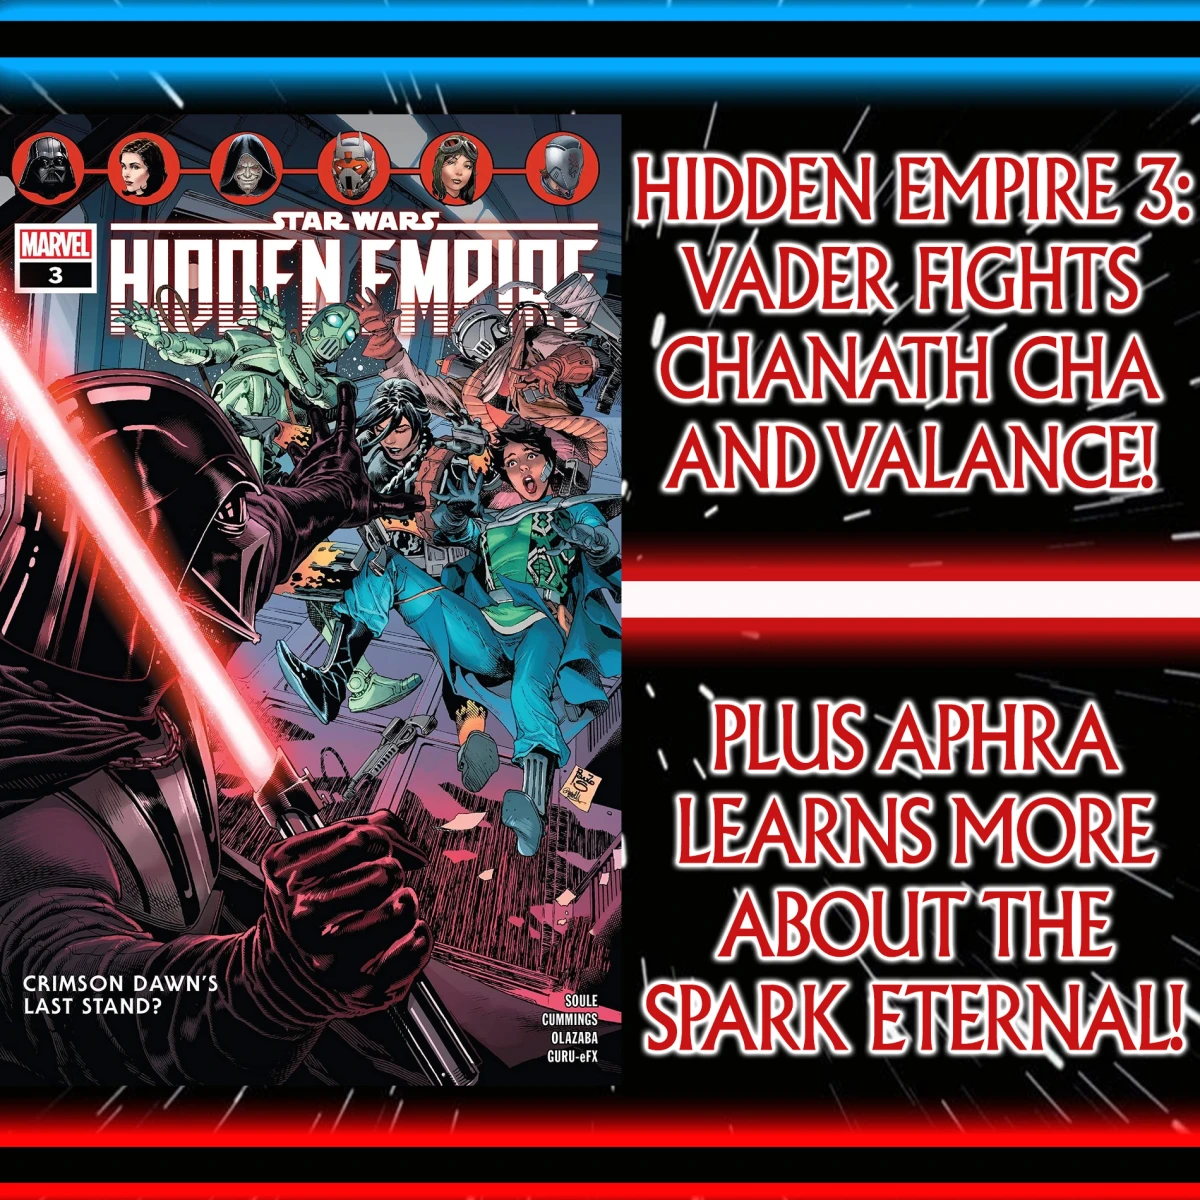 Star Wars: Comics In Canon – Hidden Empire 3: Vader Fights Chanath Cha And Beilert Valance! Plus Aphra Learns More About The Spark Eternal (HE3, DA29 & BH31) – Ep 123